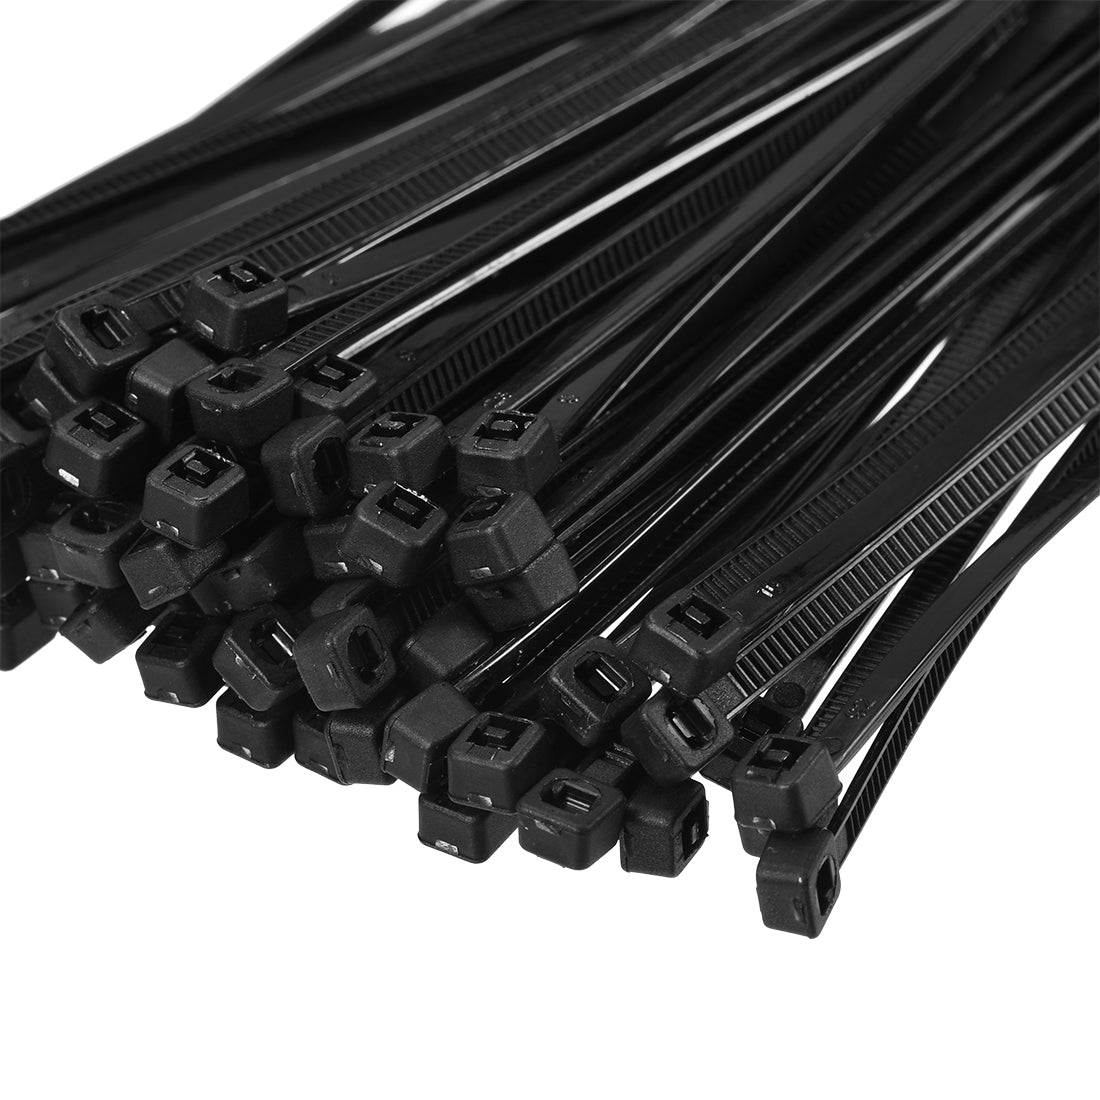 uxcell Uxcell Cable Zip Ties 150mmx2.8mm Self-Locking Nylon Tie Wraps Black 150pcs